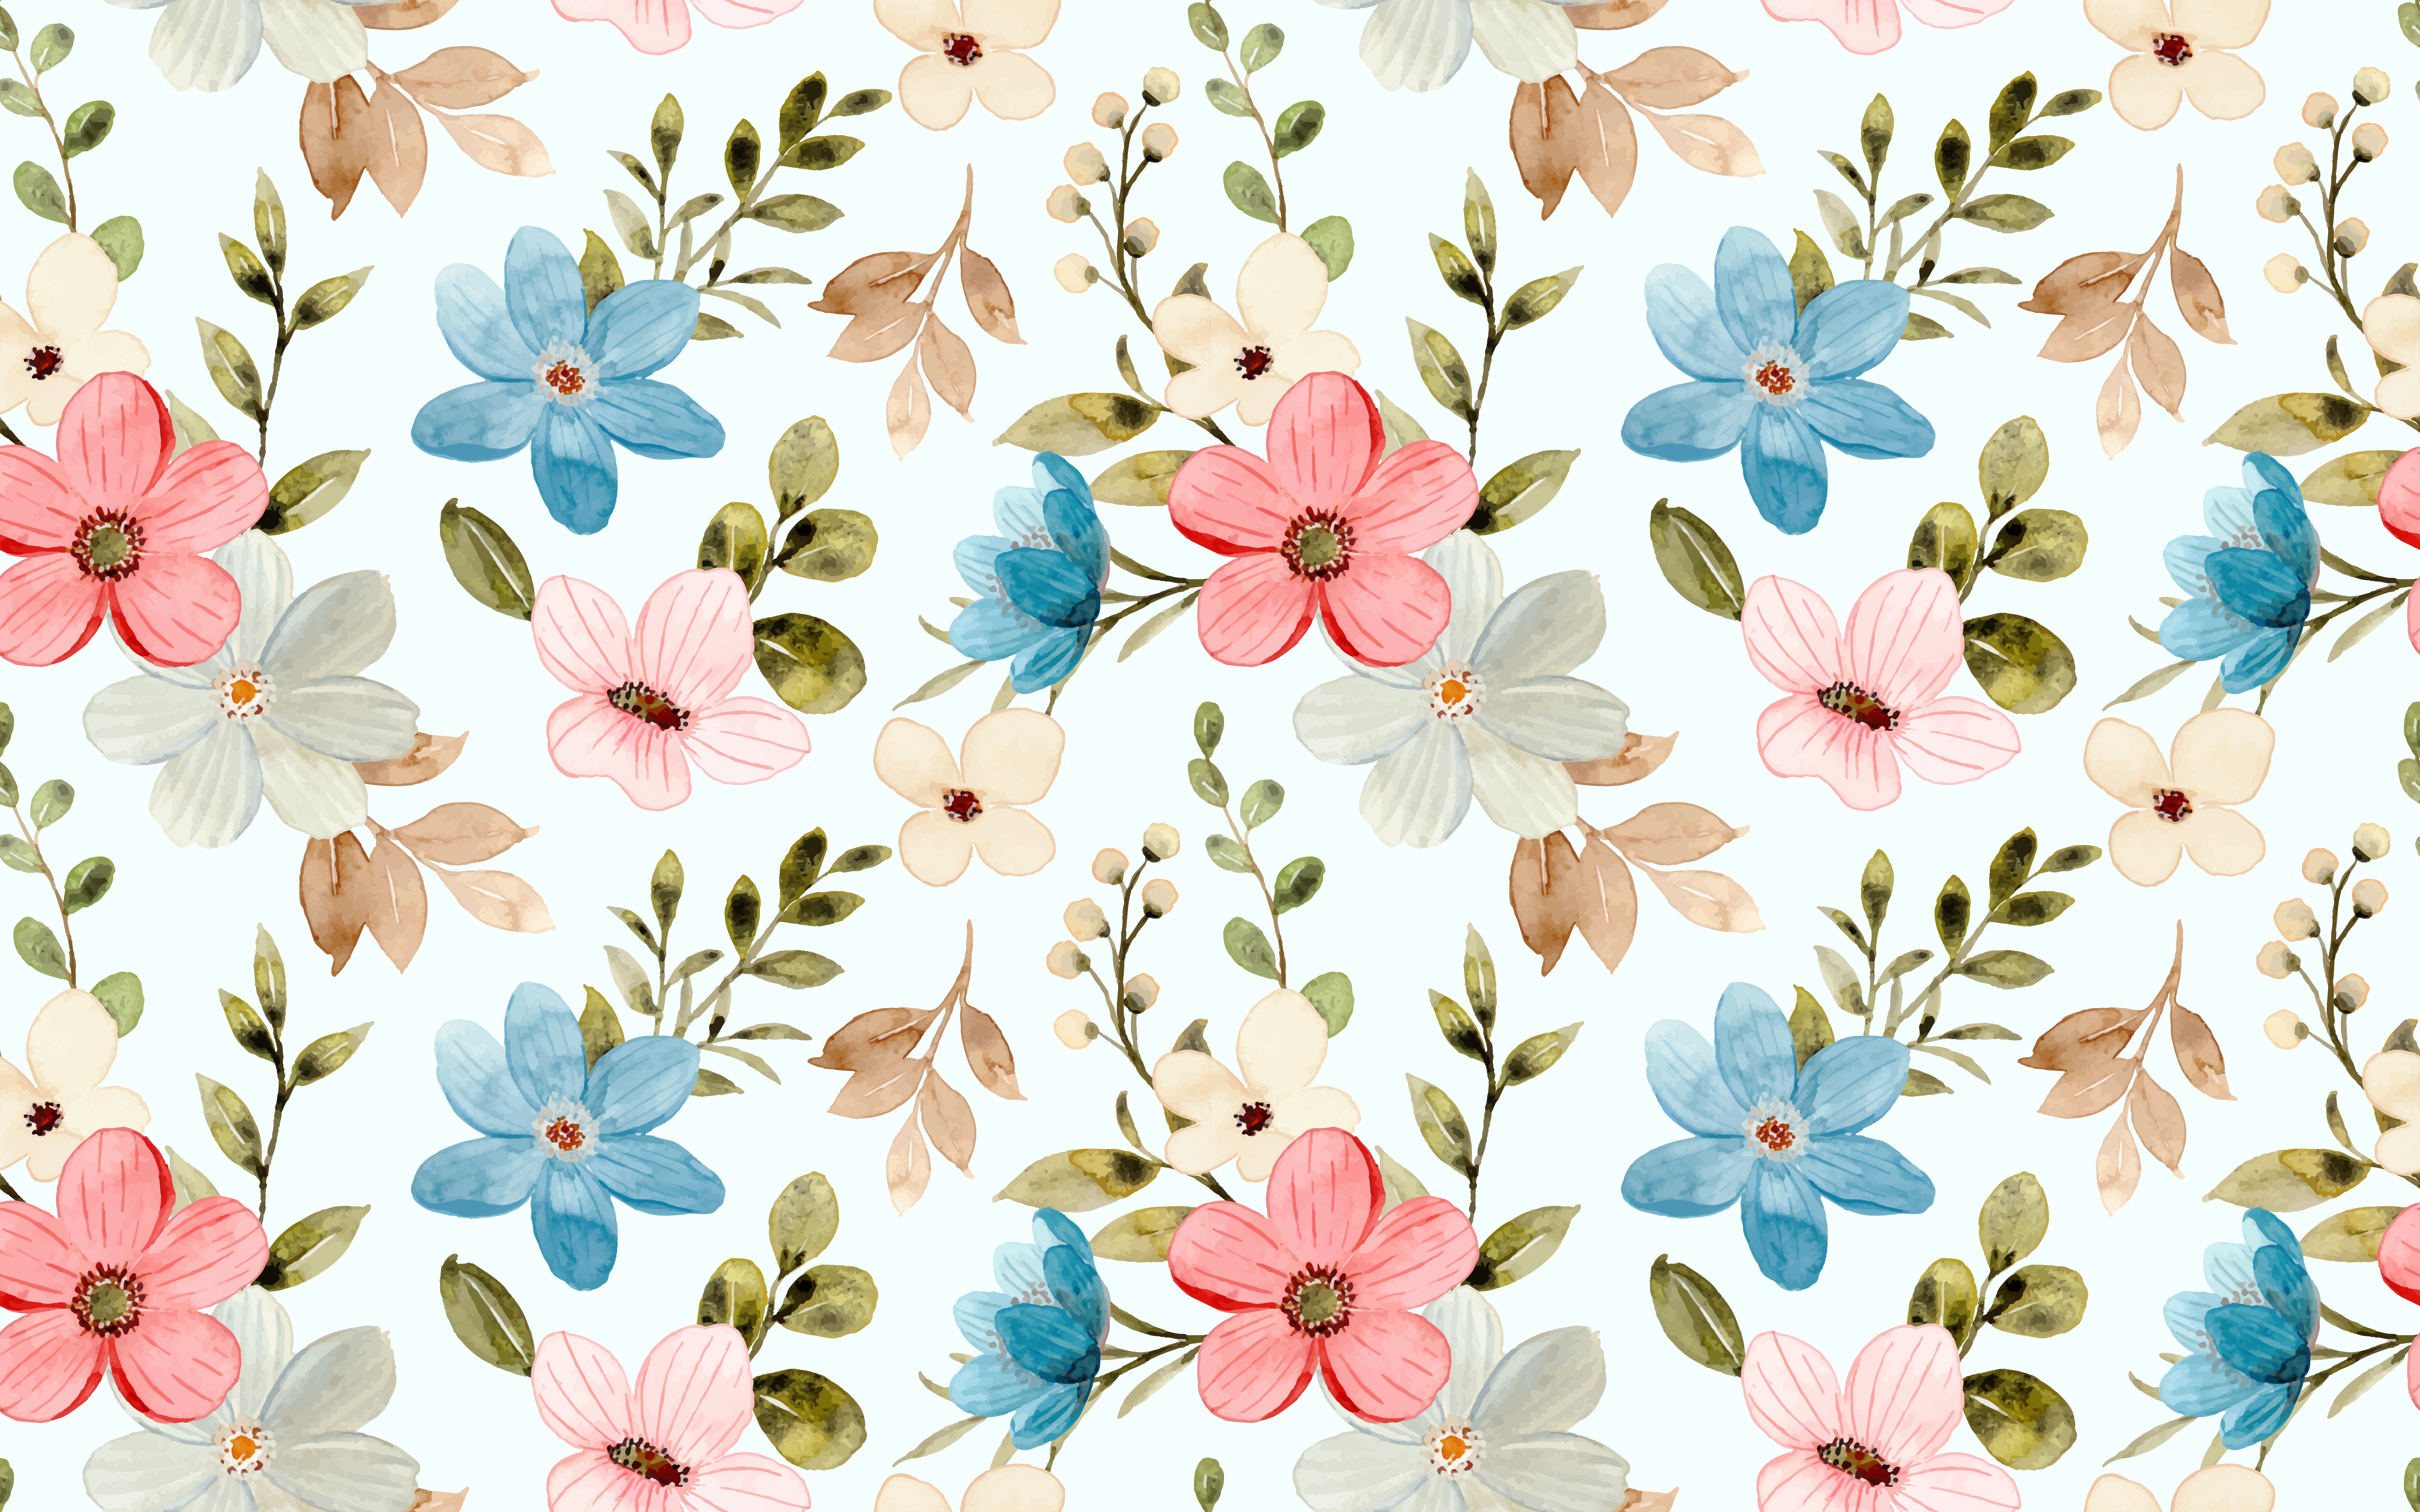 Seamless pattern of colorful watercolor wildflowers